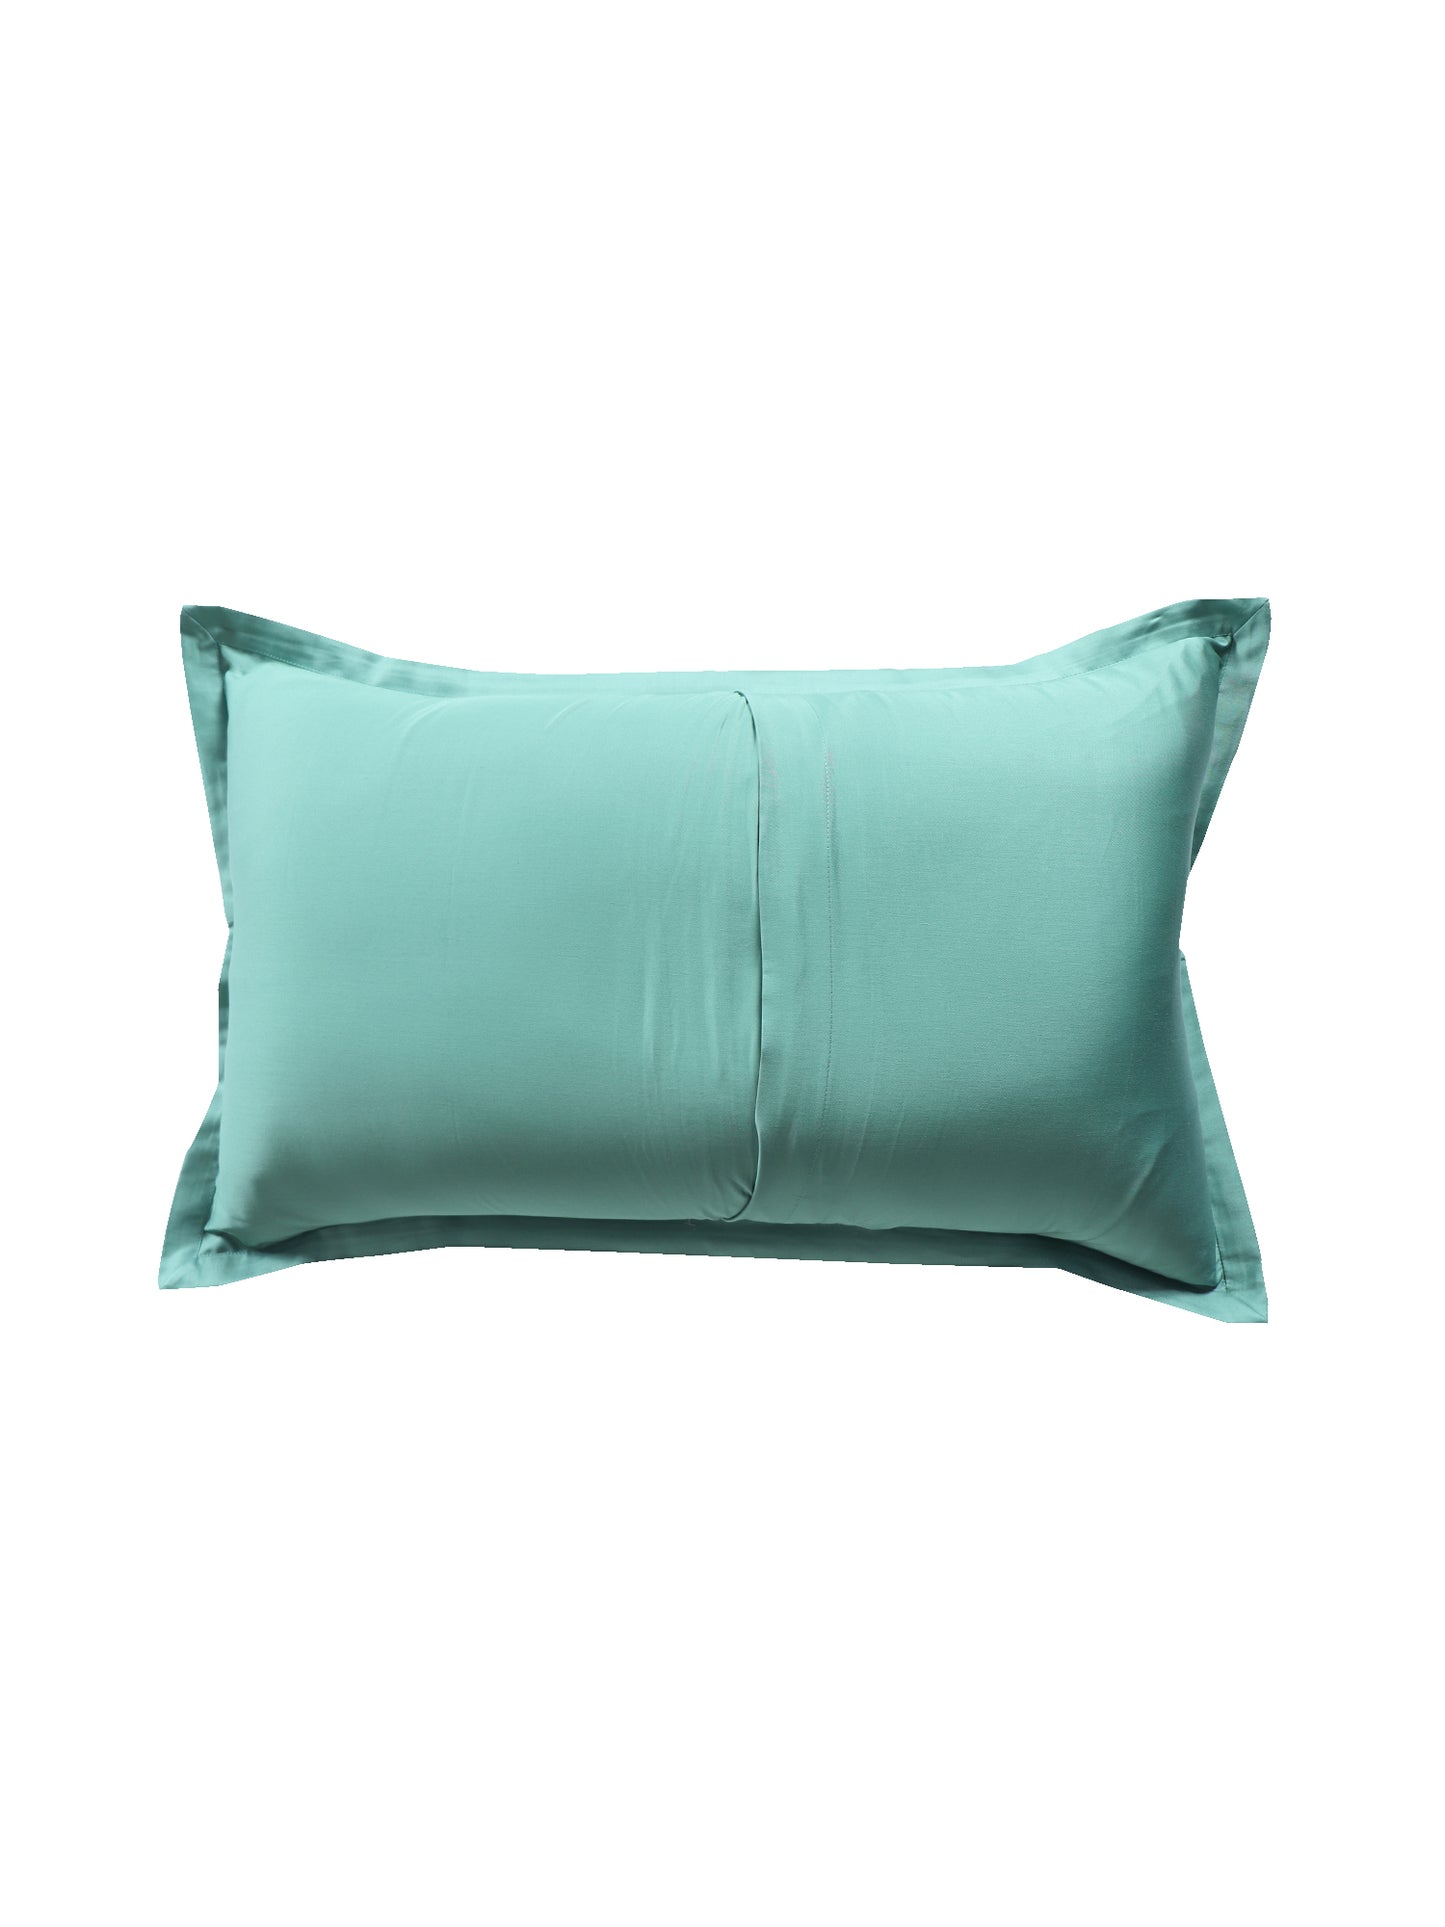 backside of green pillow sham from 100% cotton fabric in 17x27 inch fabric for kingsize bed